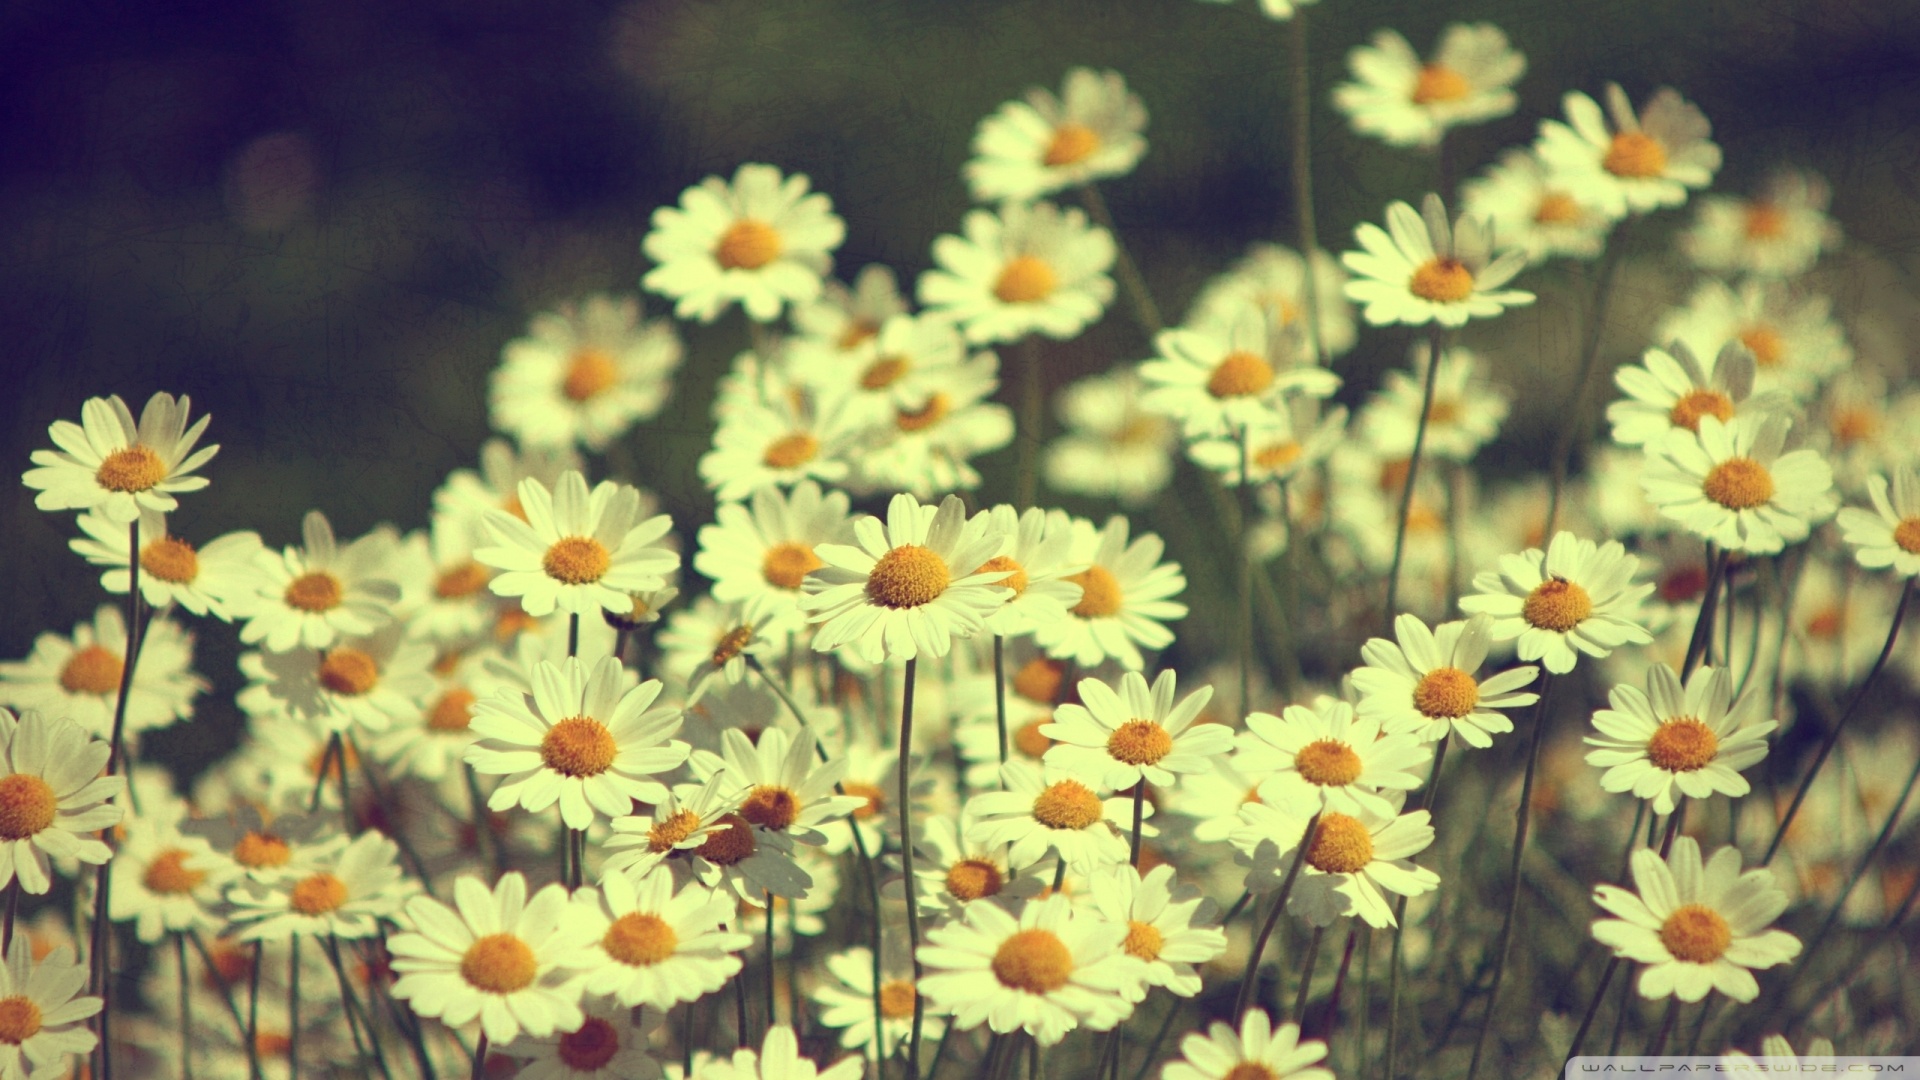 Vintage Wallpaper Photography Daisies Image